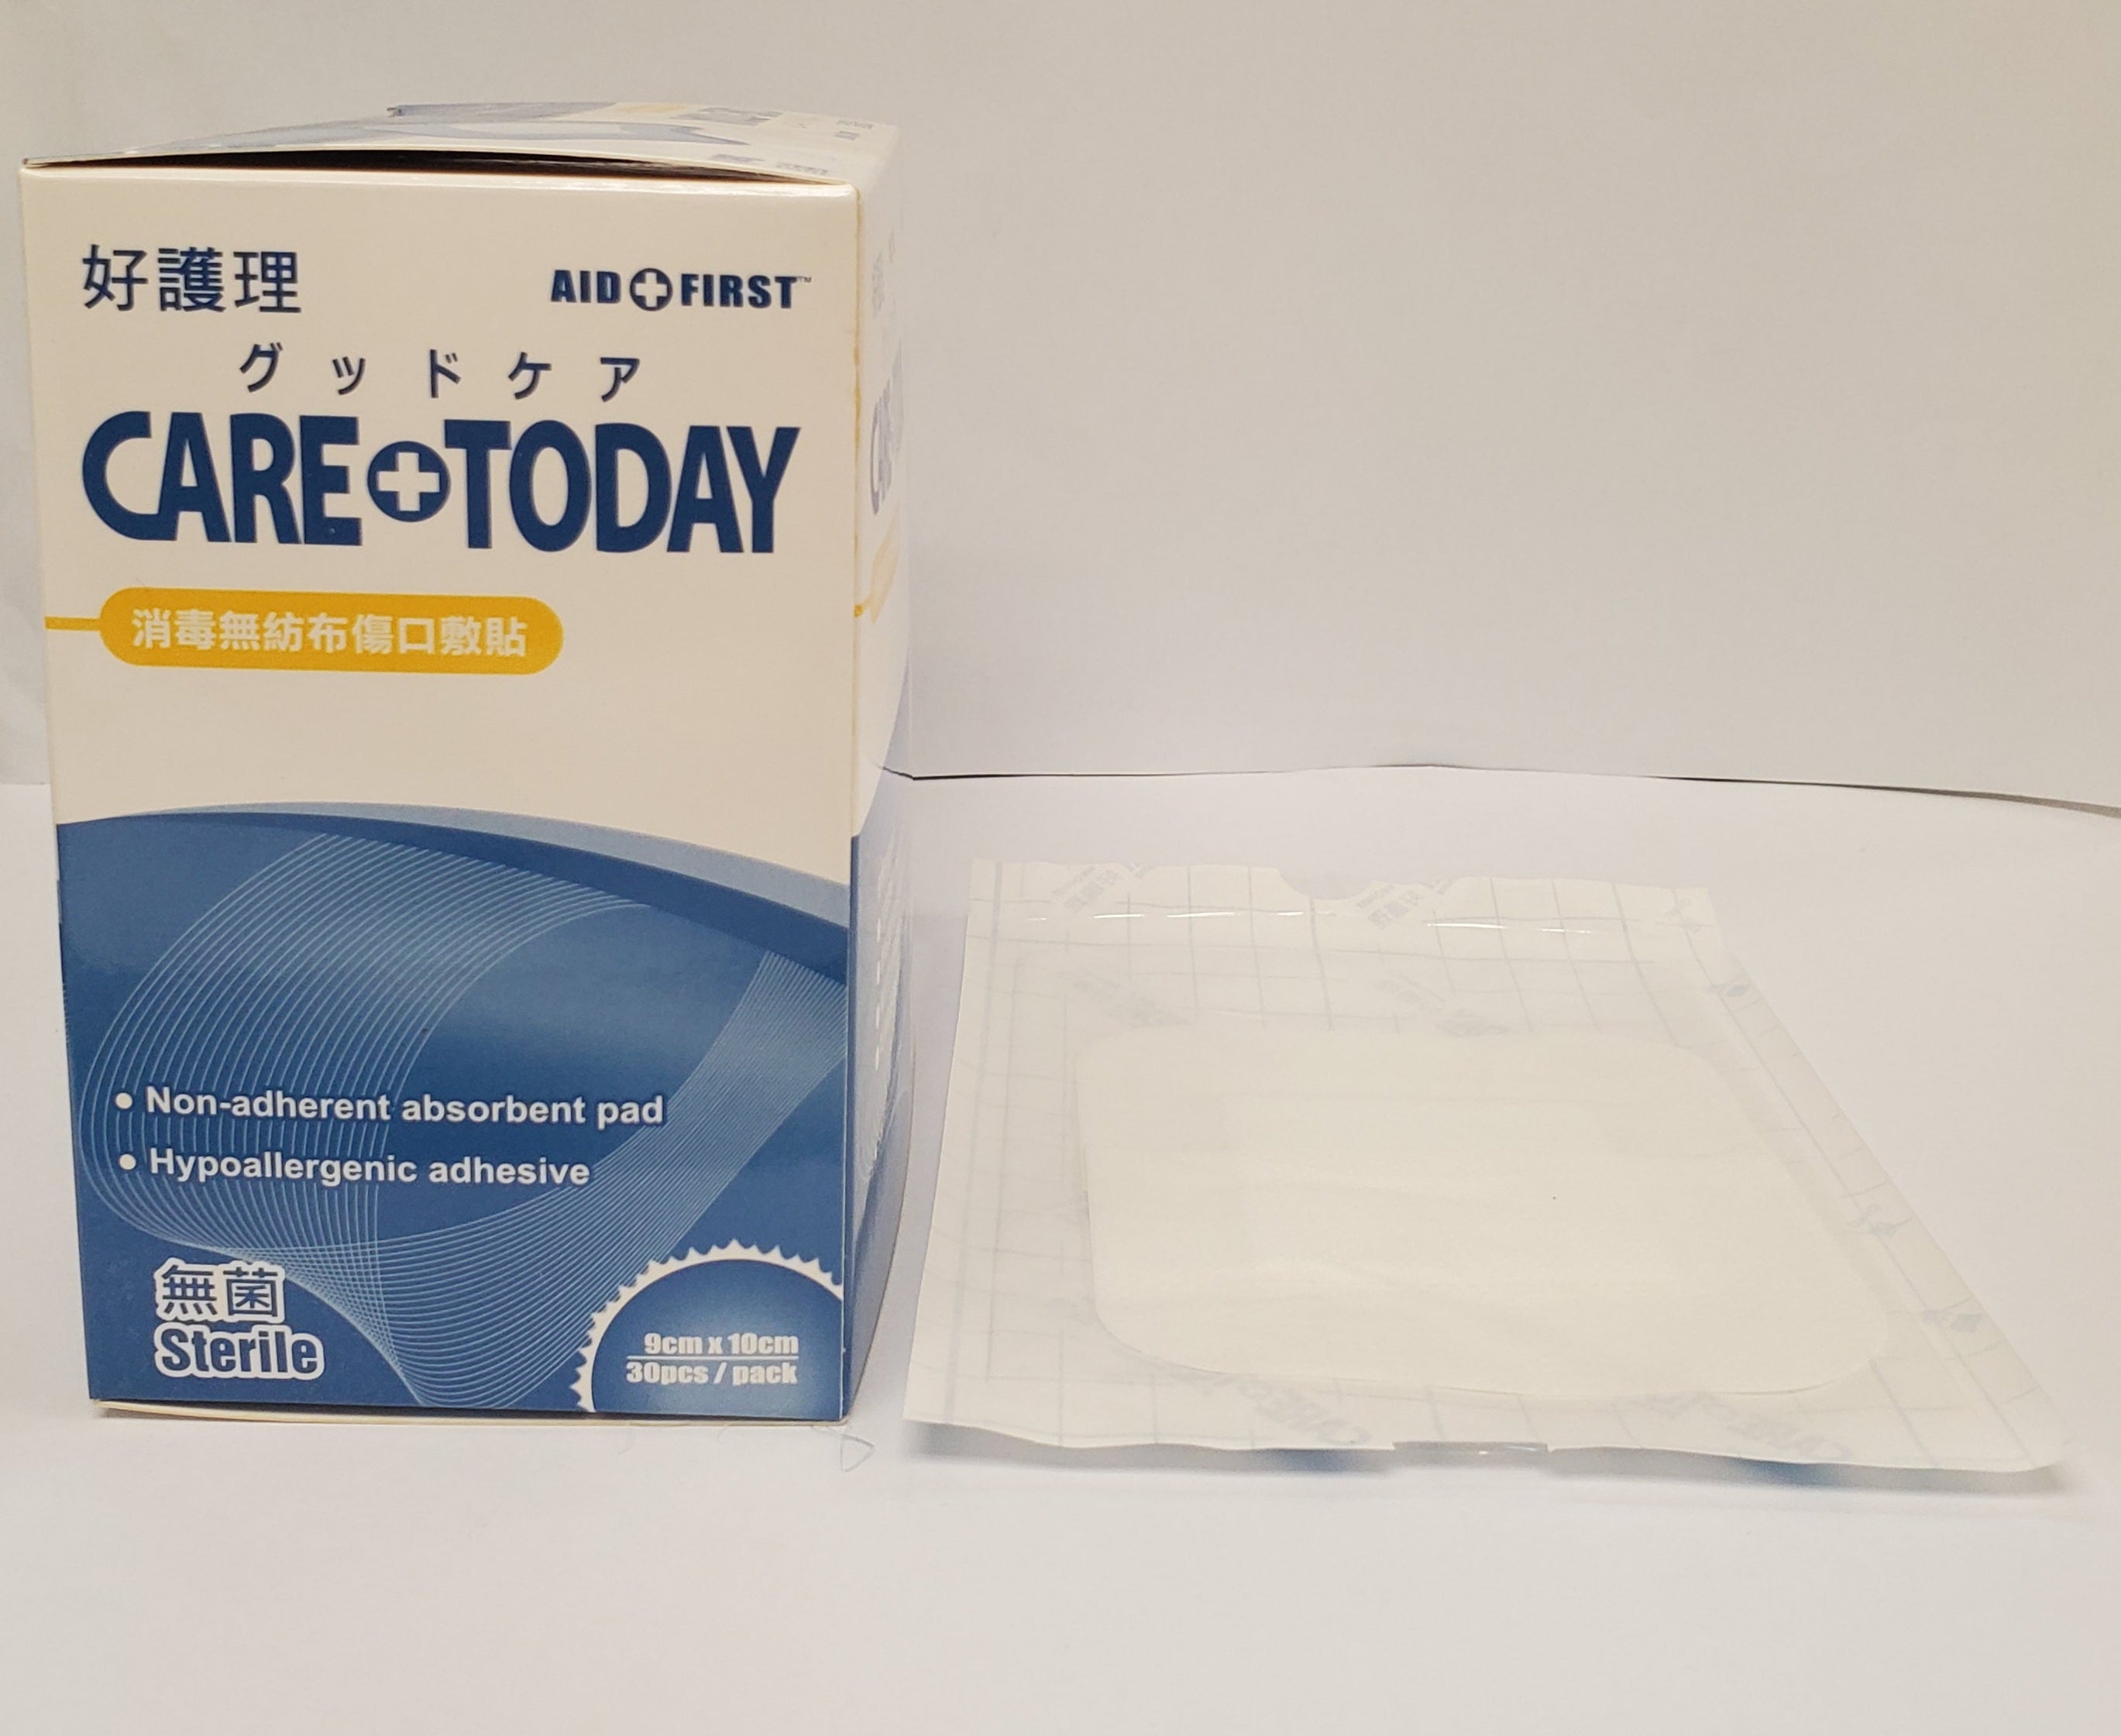 CareToday Adhesive Non-Woven Wound Dressing - 30PCS